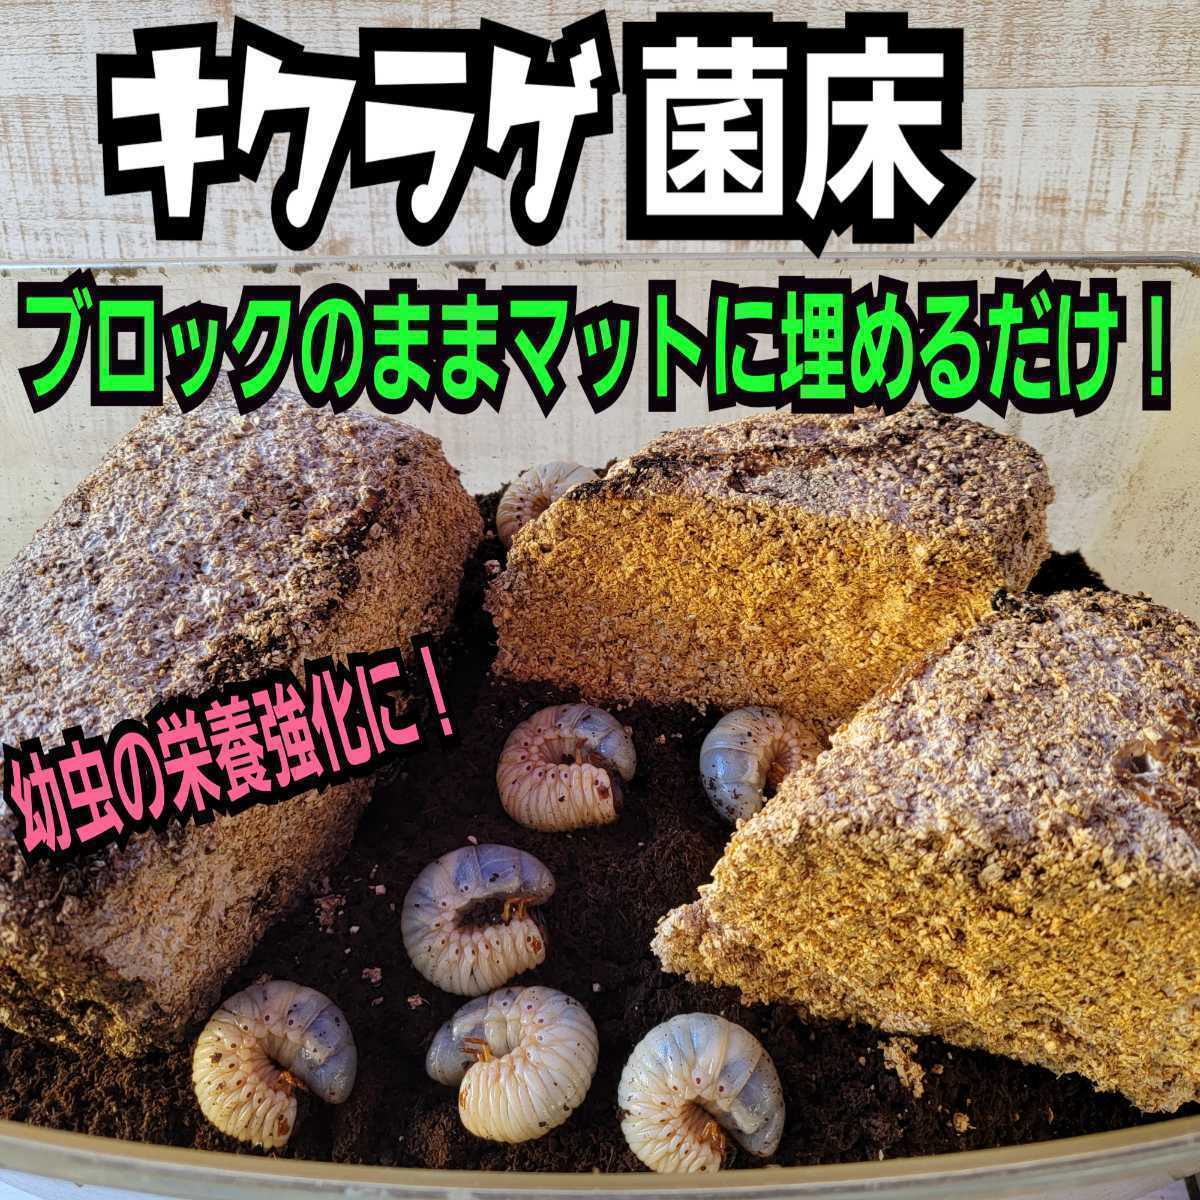  rhinoceros beetle larva. nutrition strengthen .!ki jellyfish . floor extra-large block [5 piece ] mat . embed only .mo Limo li meal ..! stag beetle. production egg floor also sawtooth oak, 100%